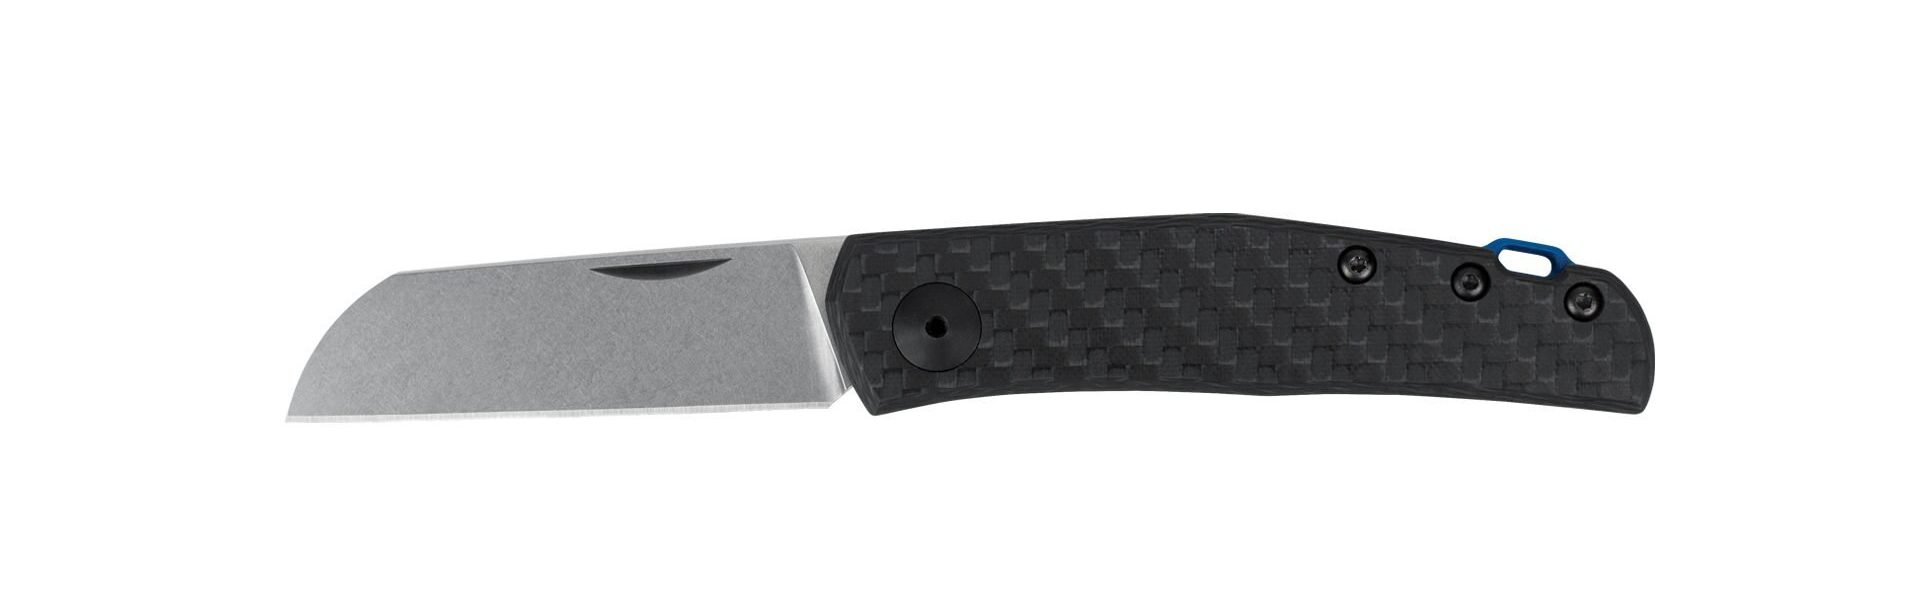 Pocket cleaver with black handle by Zero Tolerance Knives.